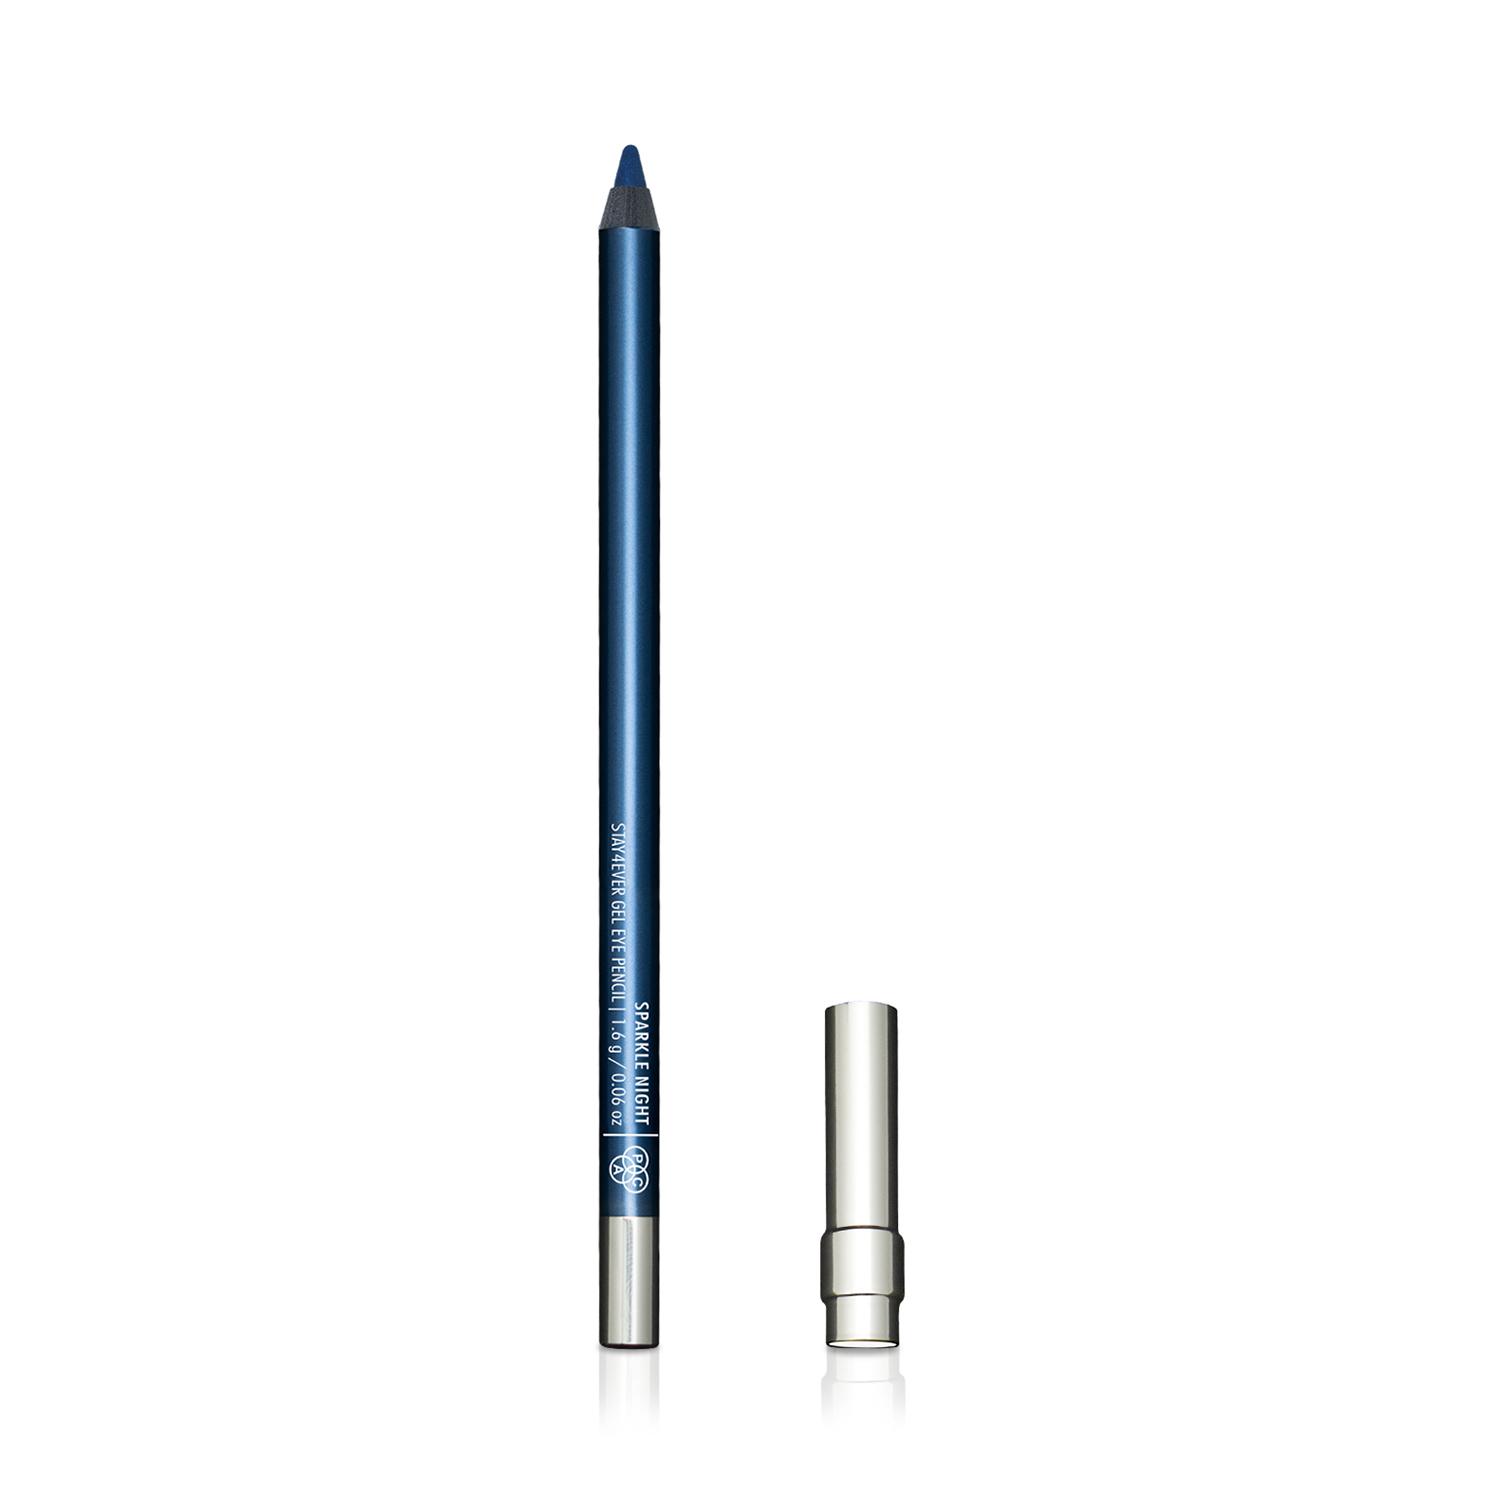 PAC | PAC Stay4Ever Gel Eye Pencil - Sparkle Night (1.6g)